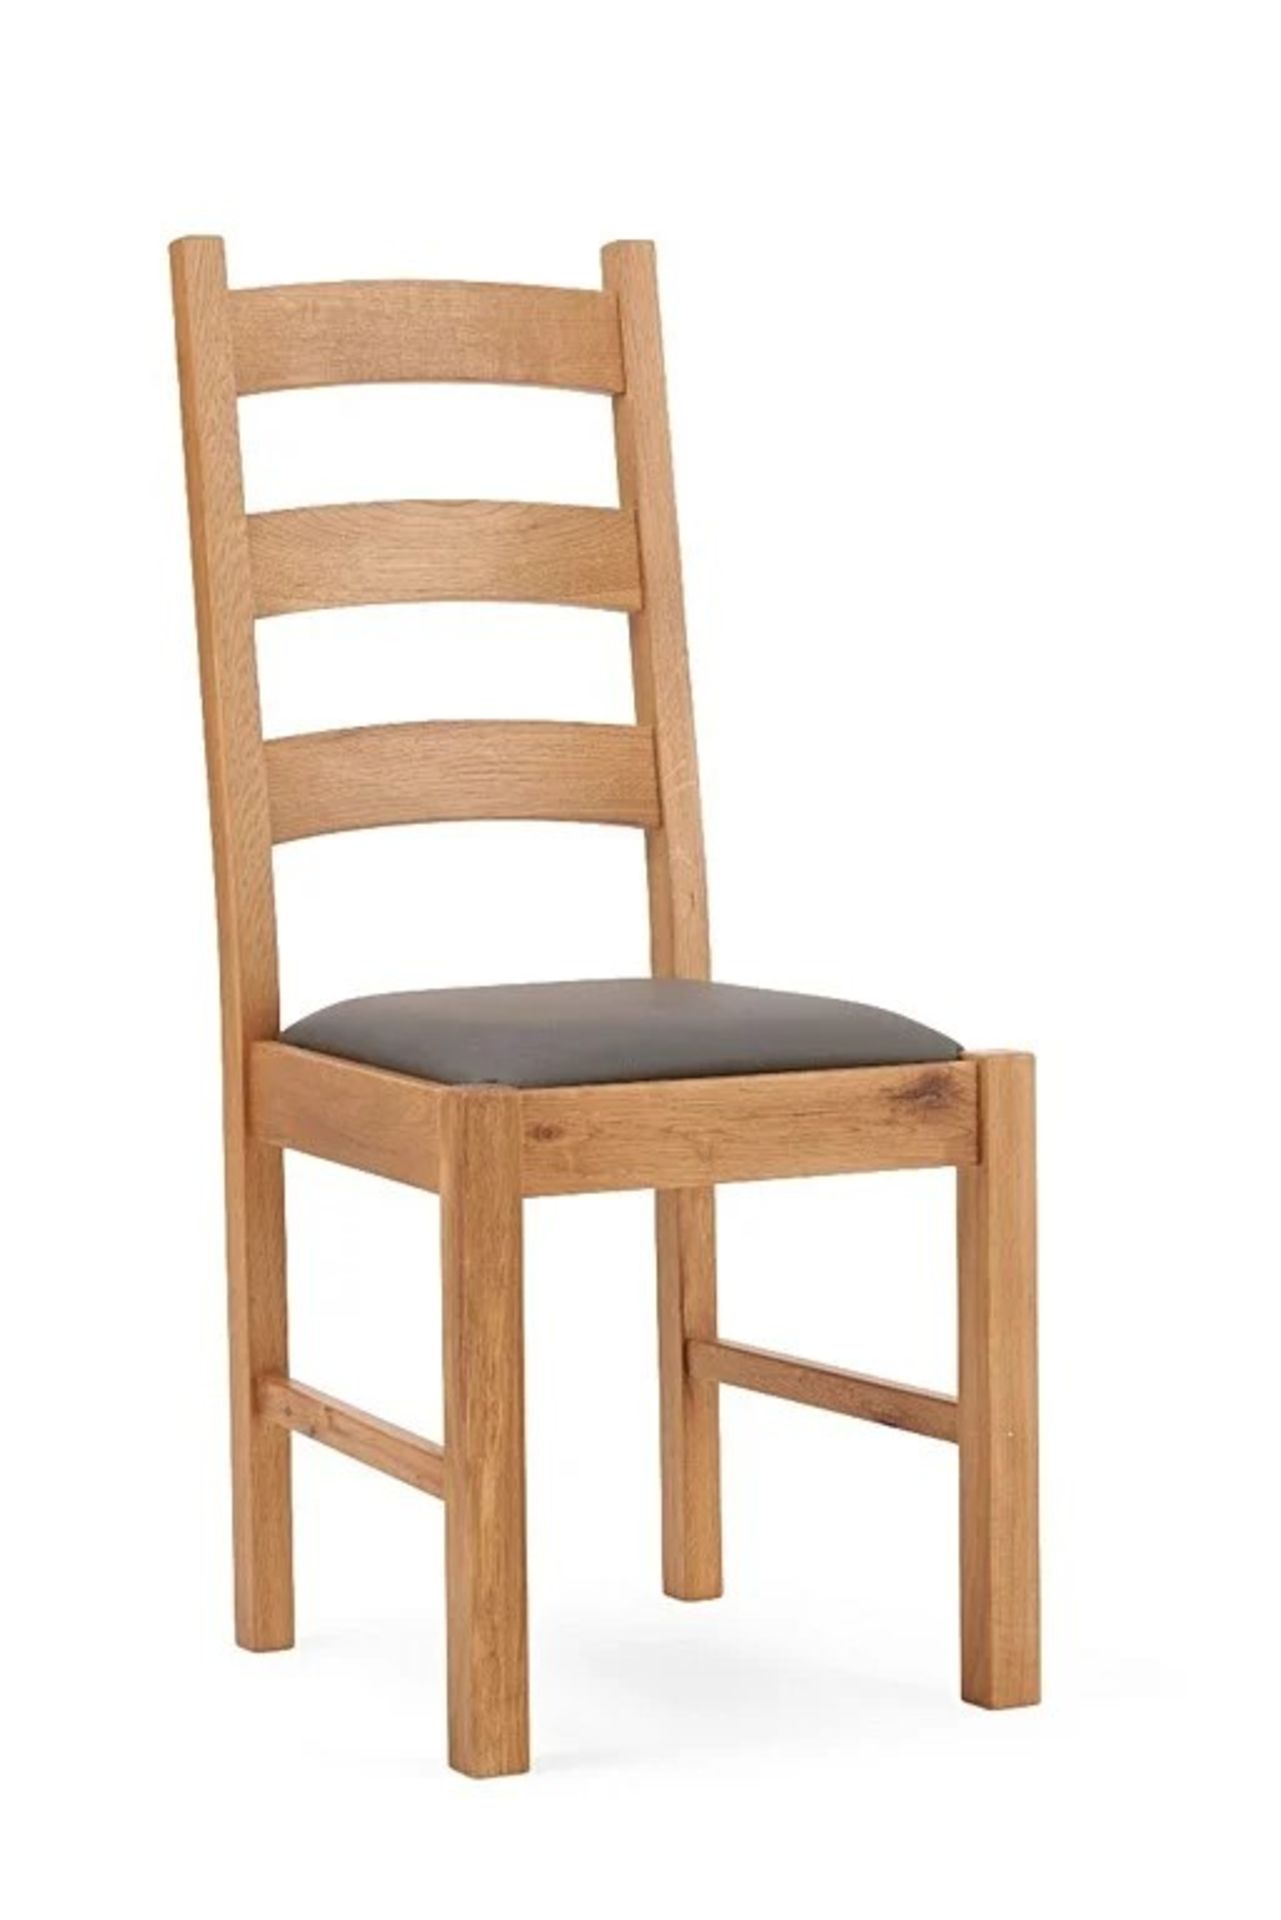 A set of 2 x Vermont Solid Oak Dining Chairs Expertly crafted from elm and oak, these robust slatted